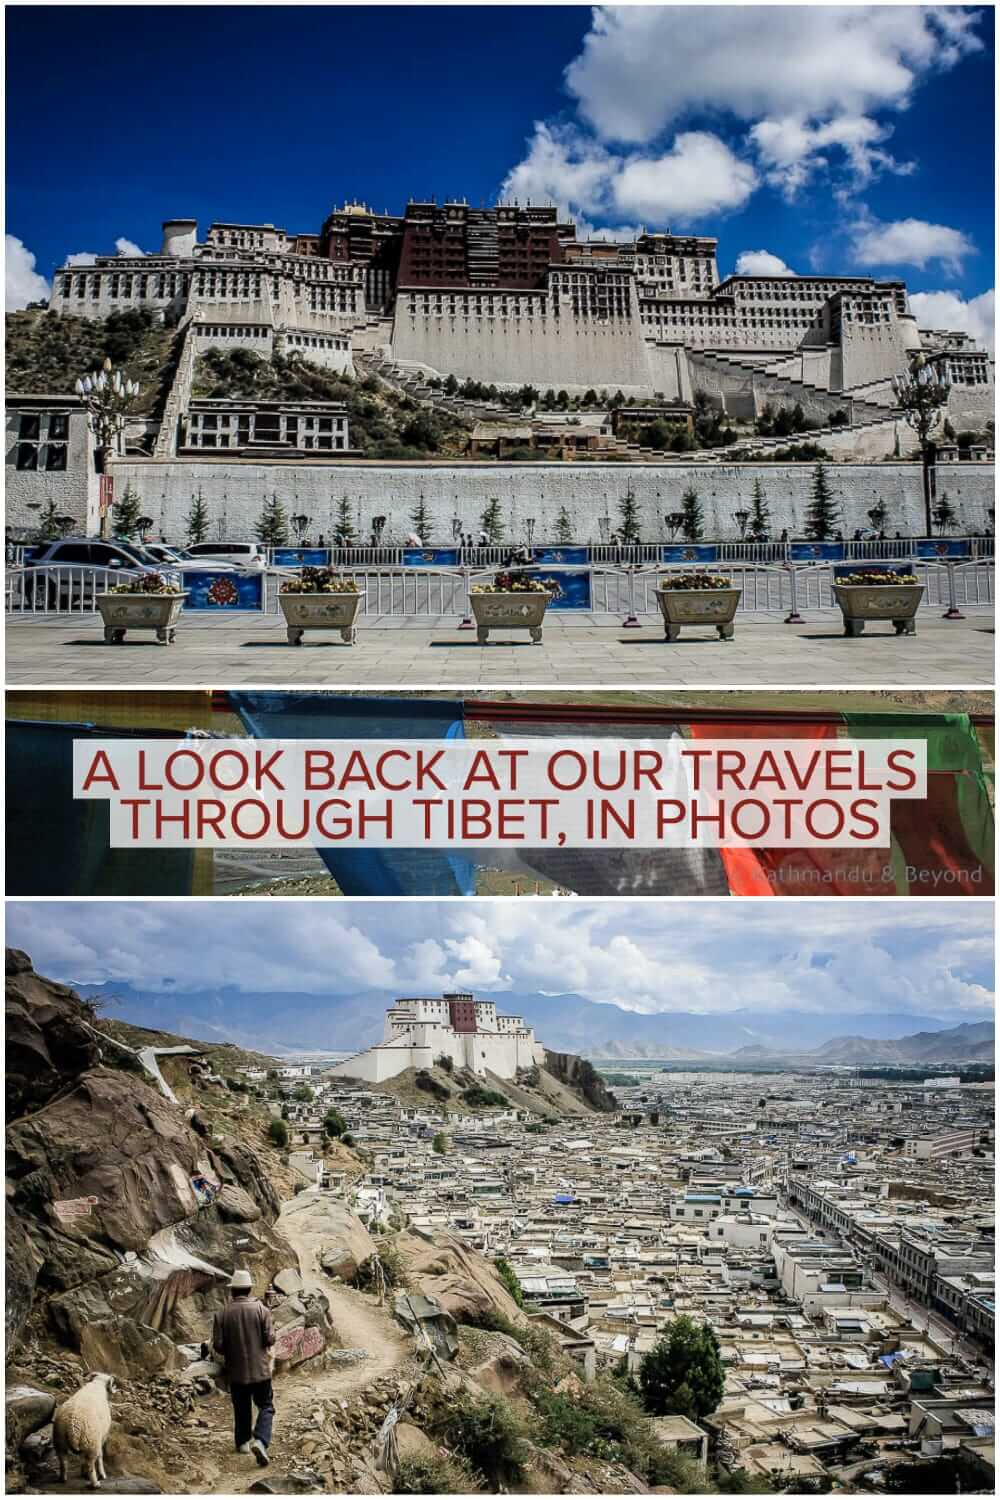 Photos of Tibet. A photographic look back at our travels through Tibet-1